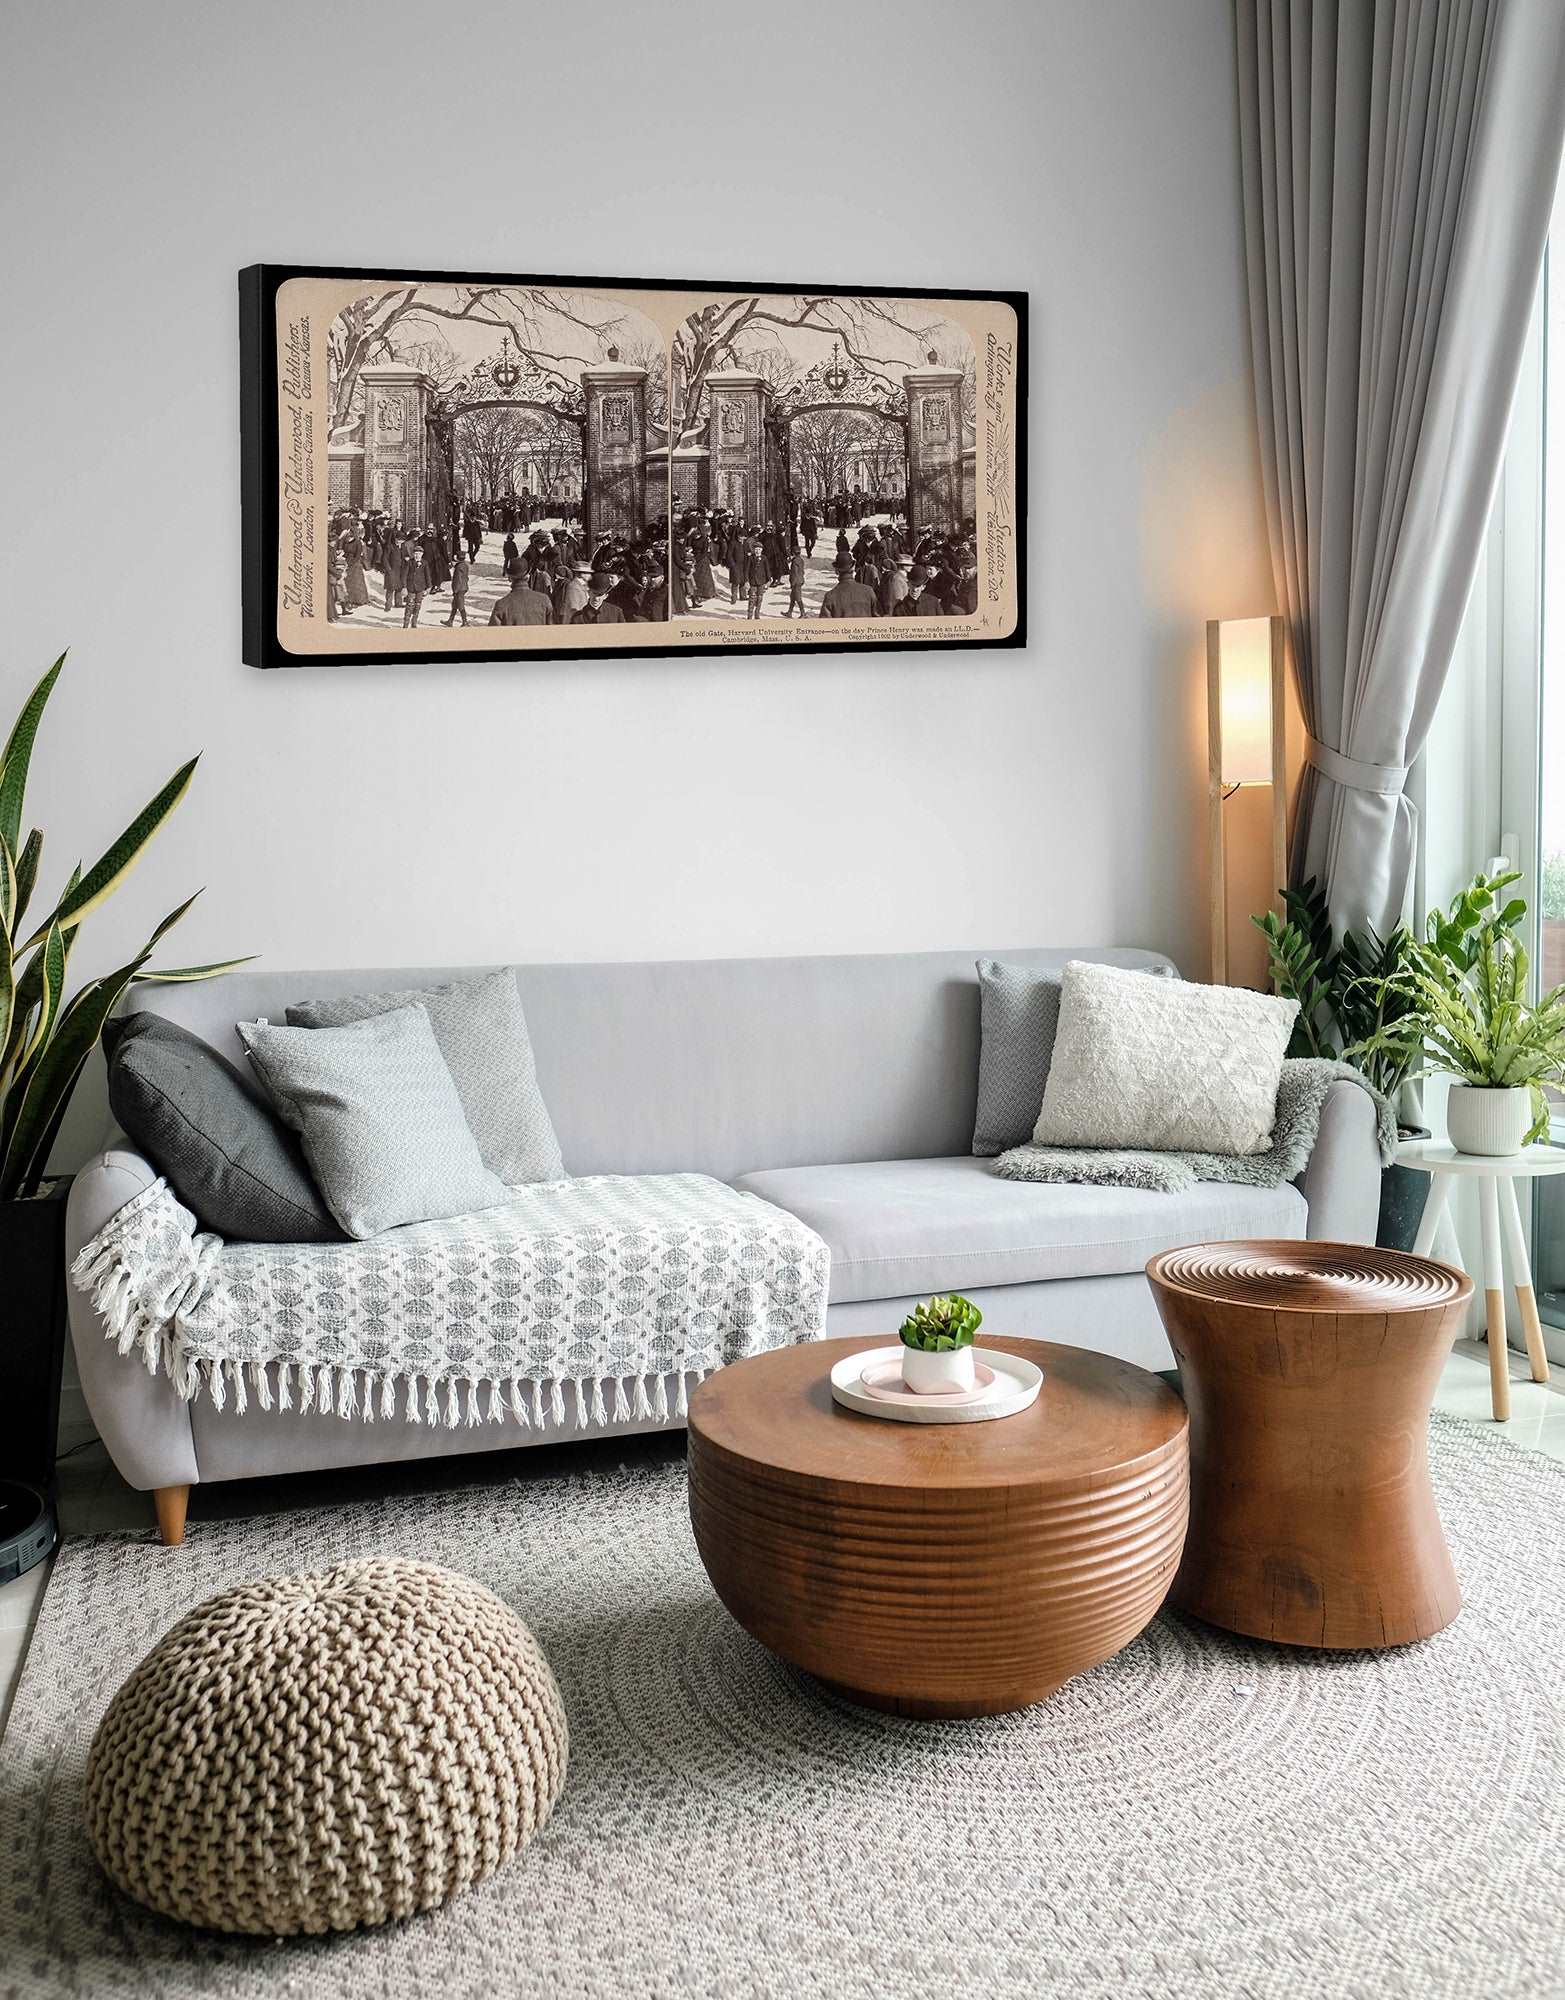 A photograph of a canvas print reproduction of a vintage stereograph image hanging above a couch